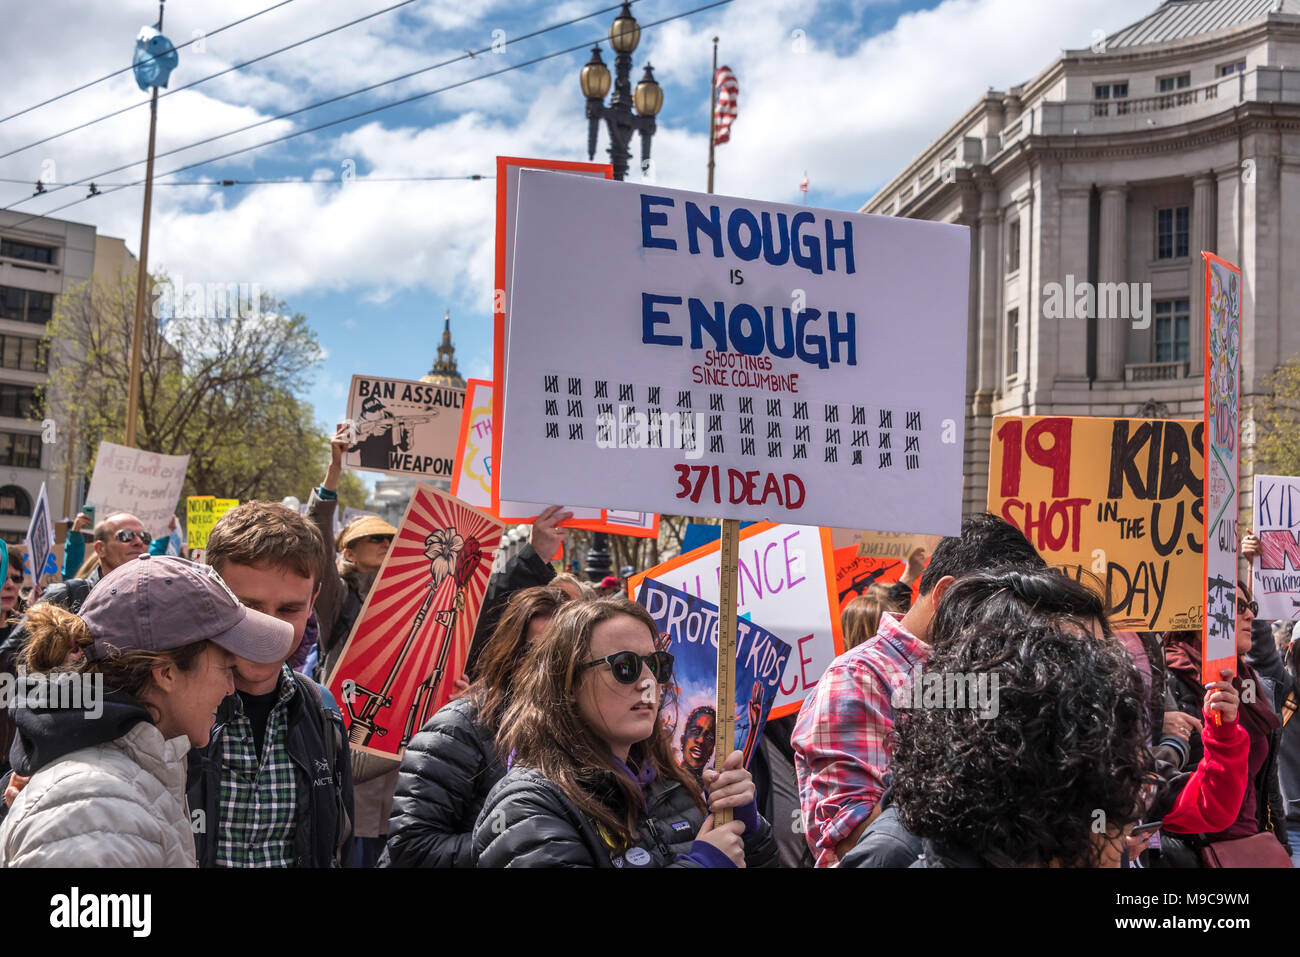 San Francisco, USA. 24th March, 2018. March for Our Lives rally and march to call for gun control and end gun violence; people march down Market Street with signs, one sign reads 'Enough is enough' with tallies for the number of deaths from shootings since Columbine (371). Shelly Rivoli/Alamy Live News Stock Photo